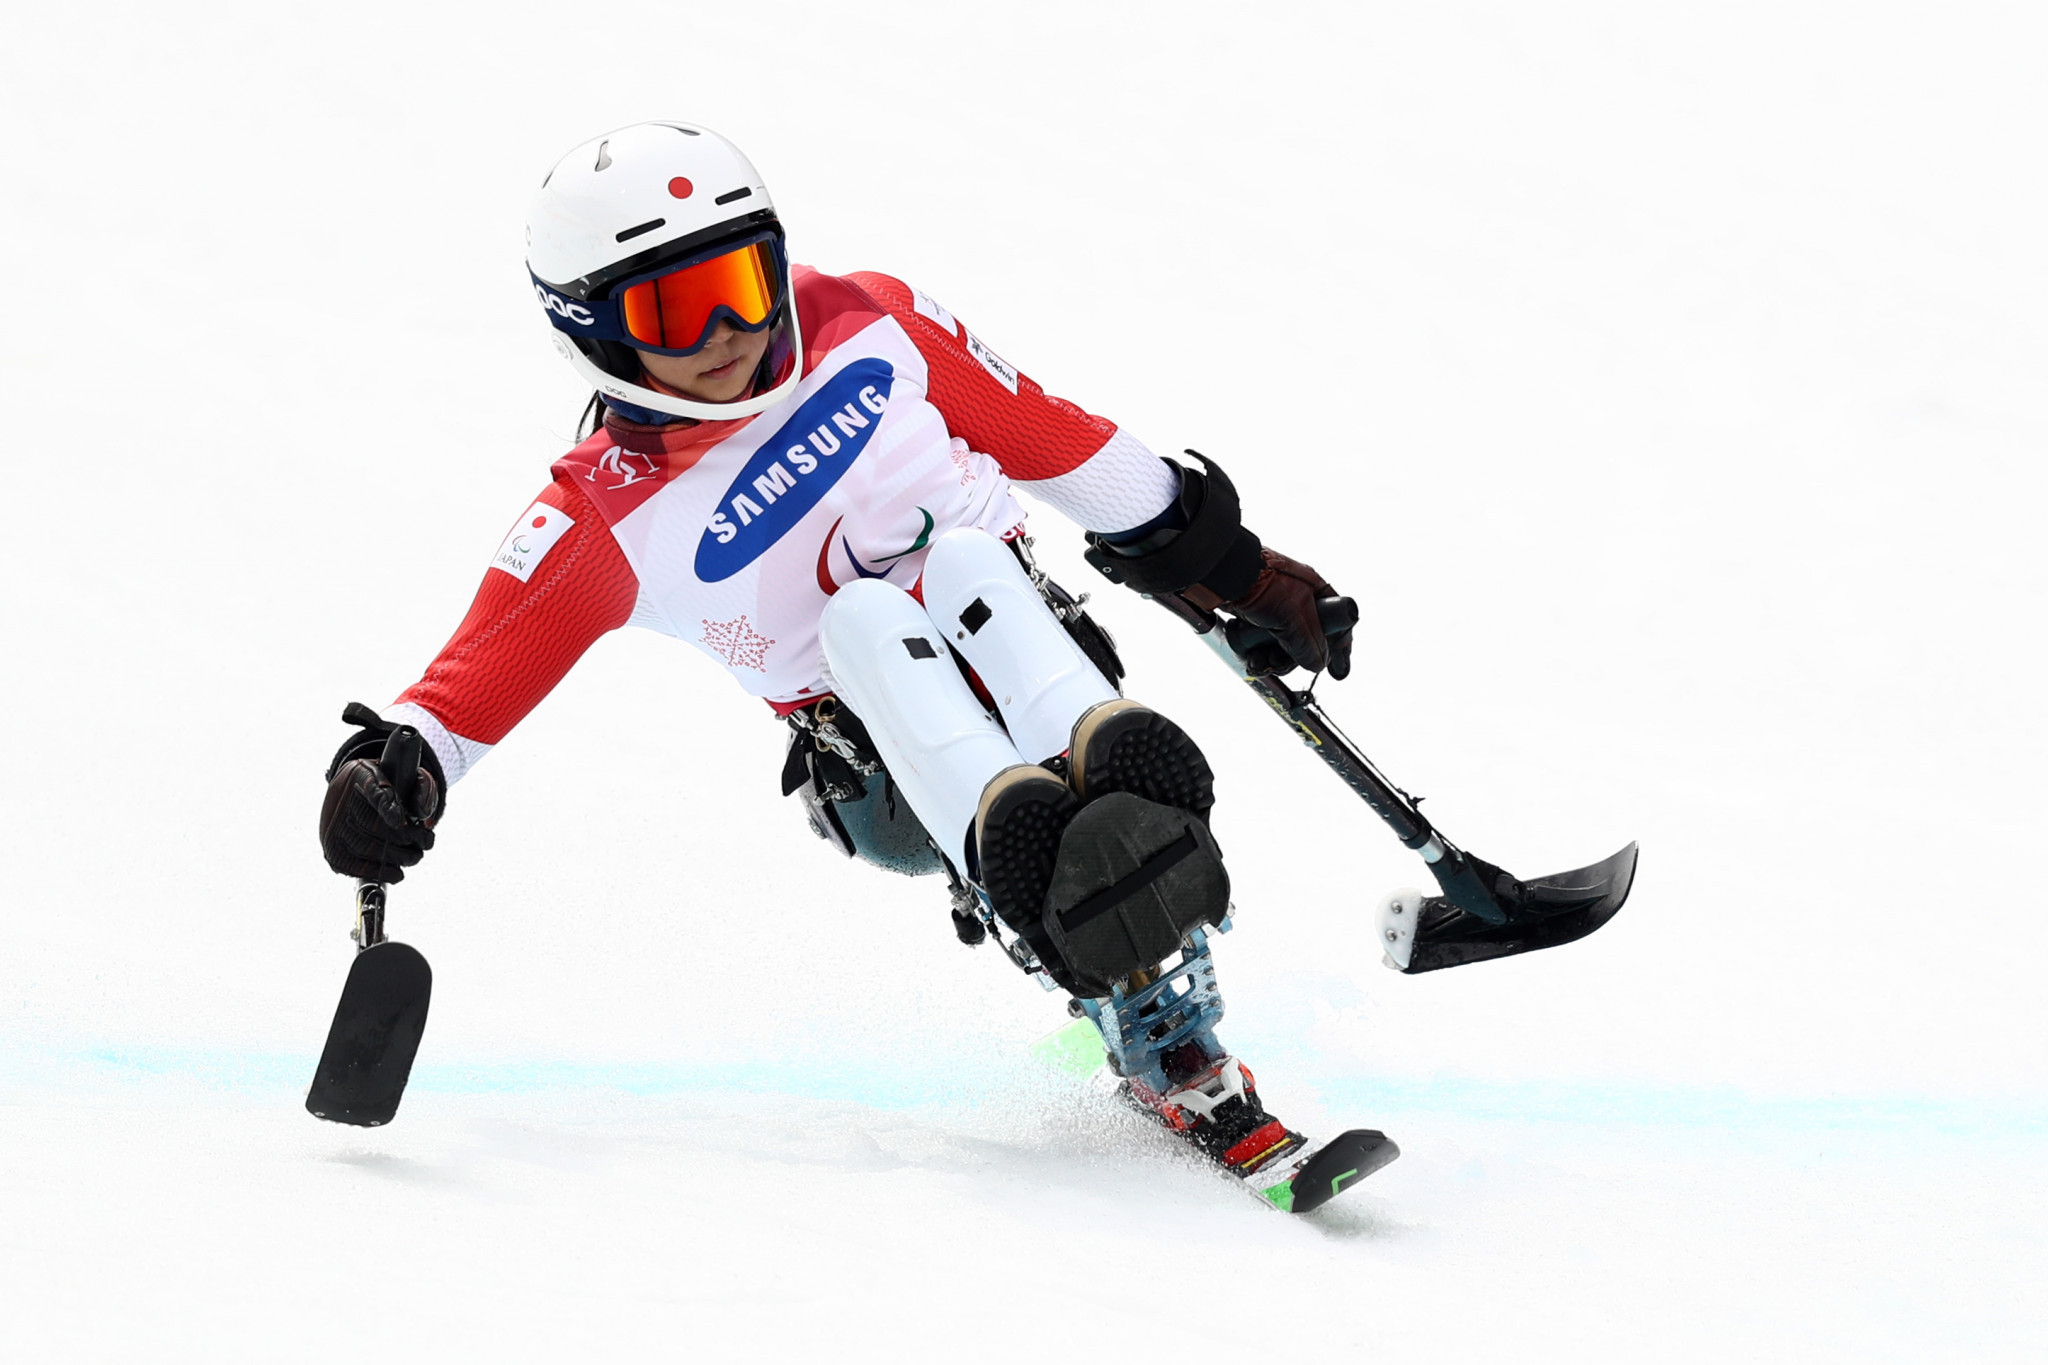 Japan's Momoka Muraoka was among the winners on the first day of giant slalom action at the World Para Alpine Skiing World Cup in Veysonnaz in Switzerland ©Getty Images